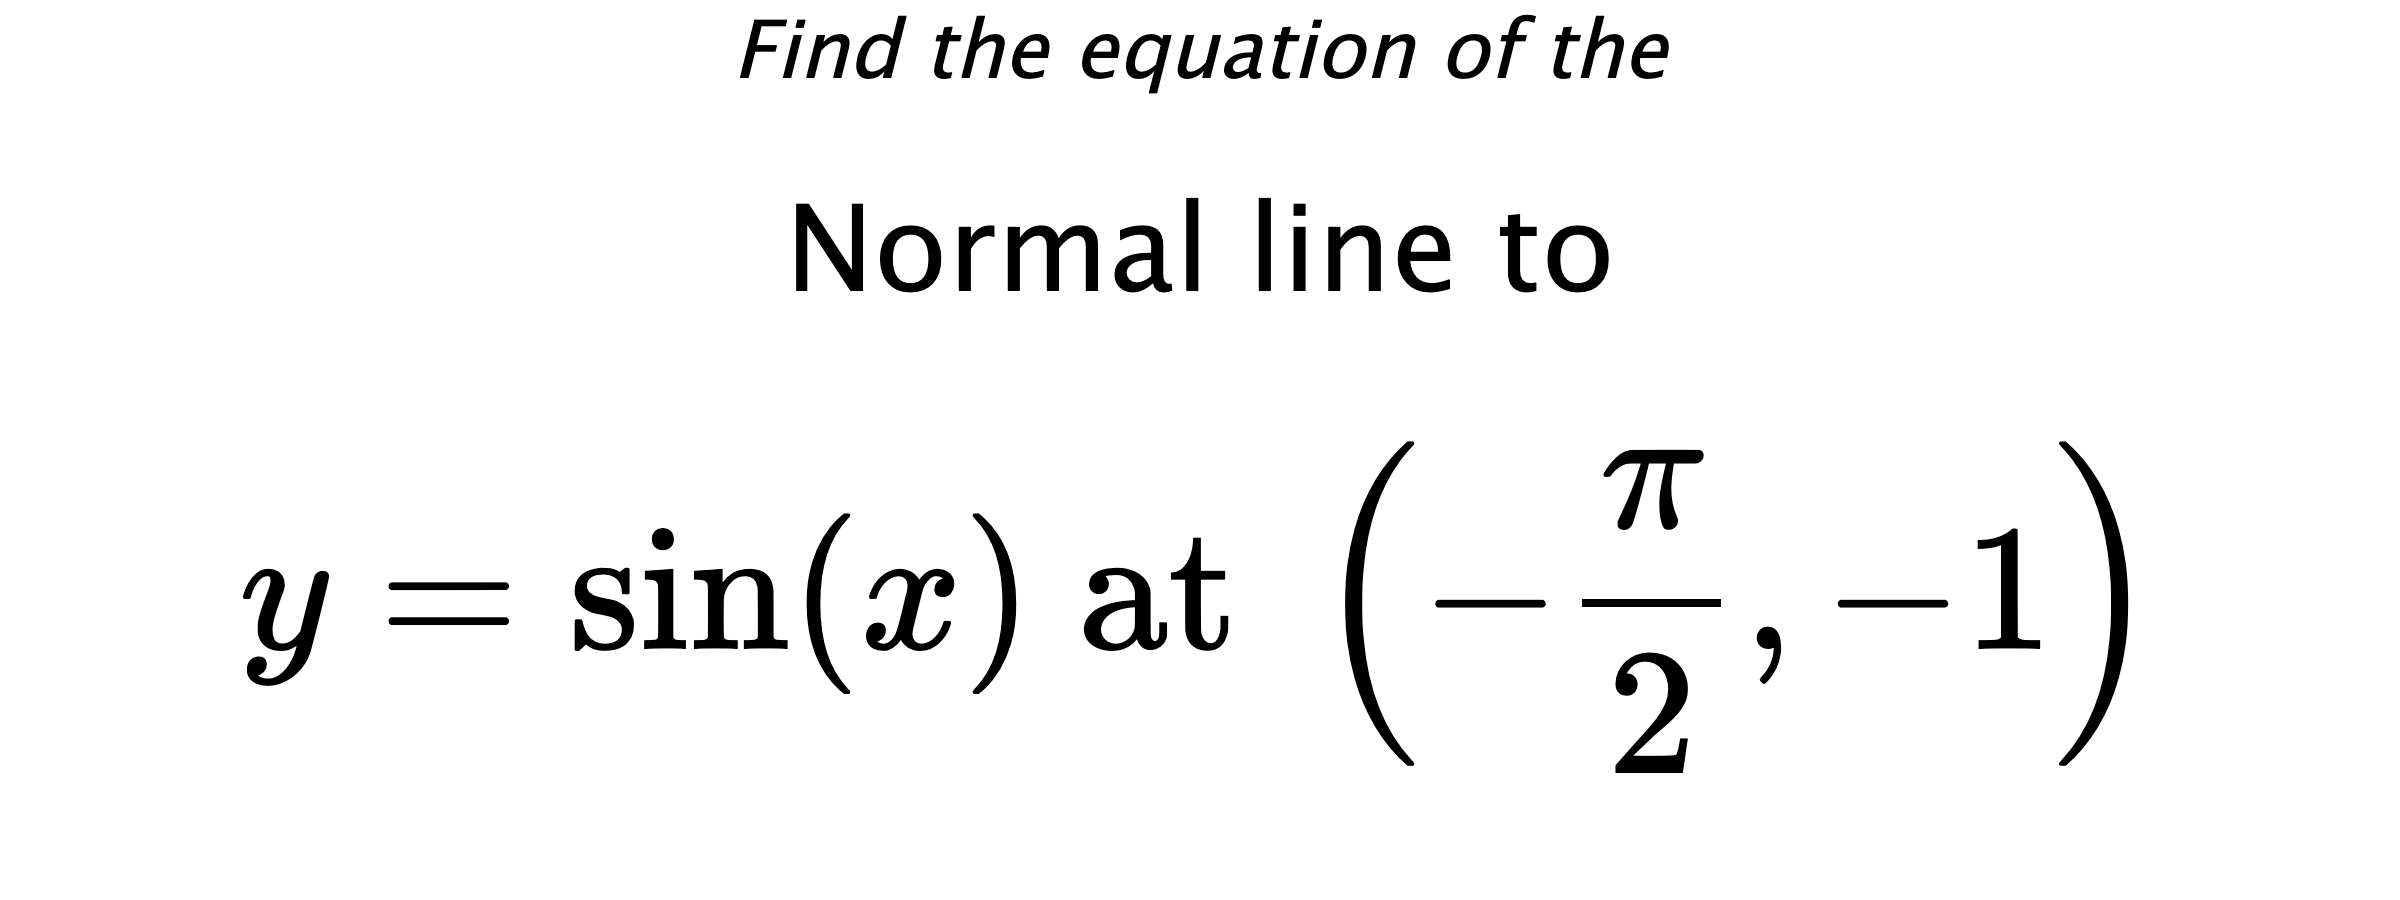 Find the equation of the Normal line to $$ y=\sin(x) \text{ at } \left(-\frac{\pi}{2},-1\right) $$